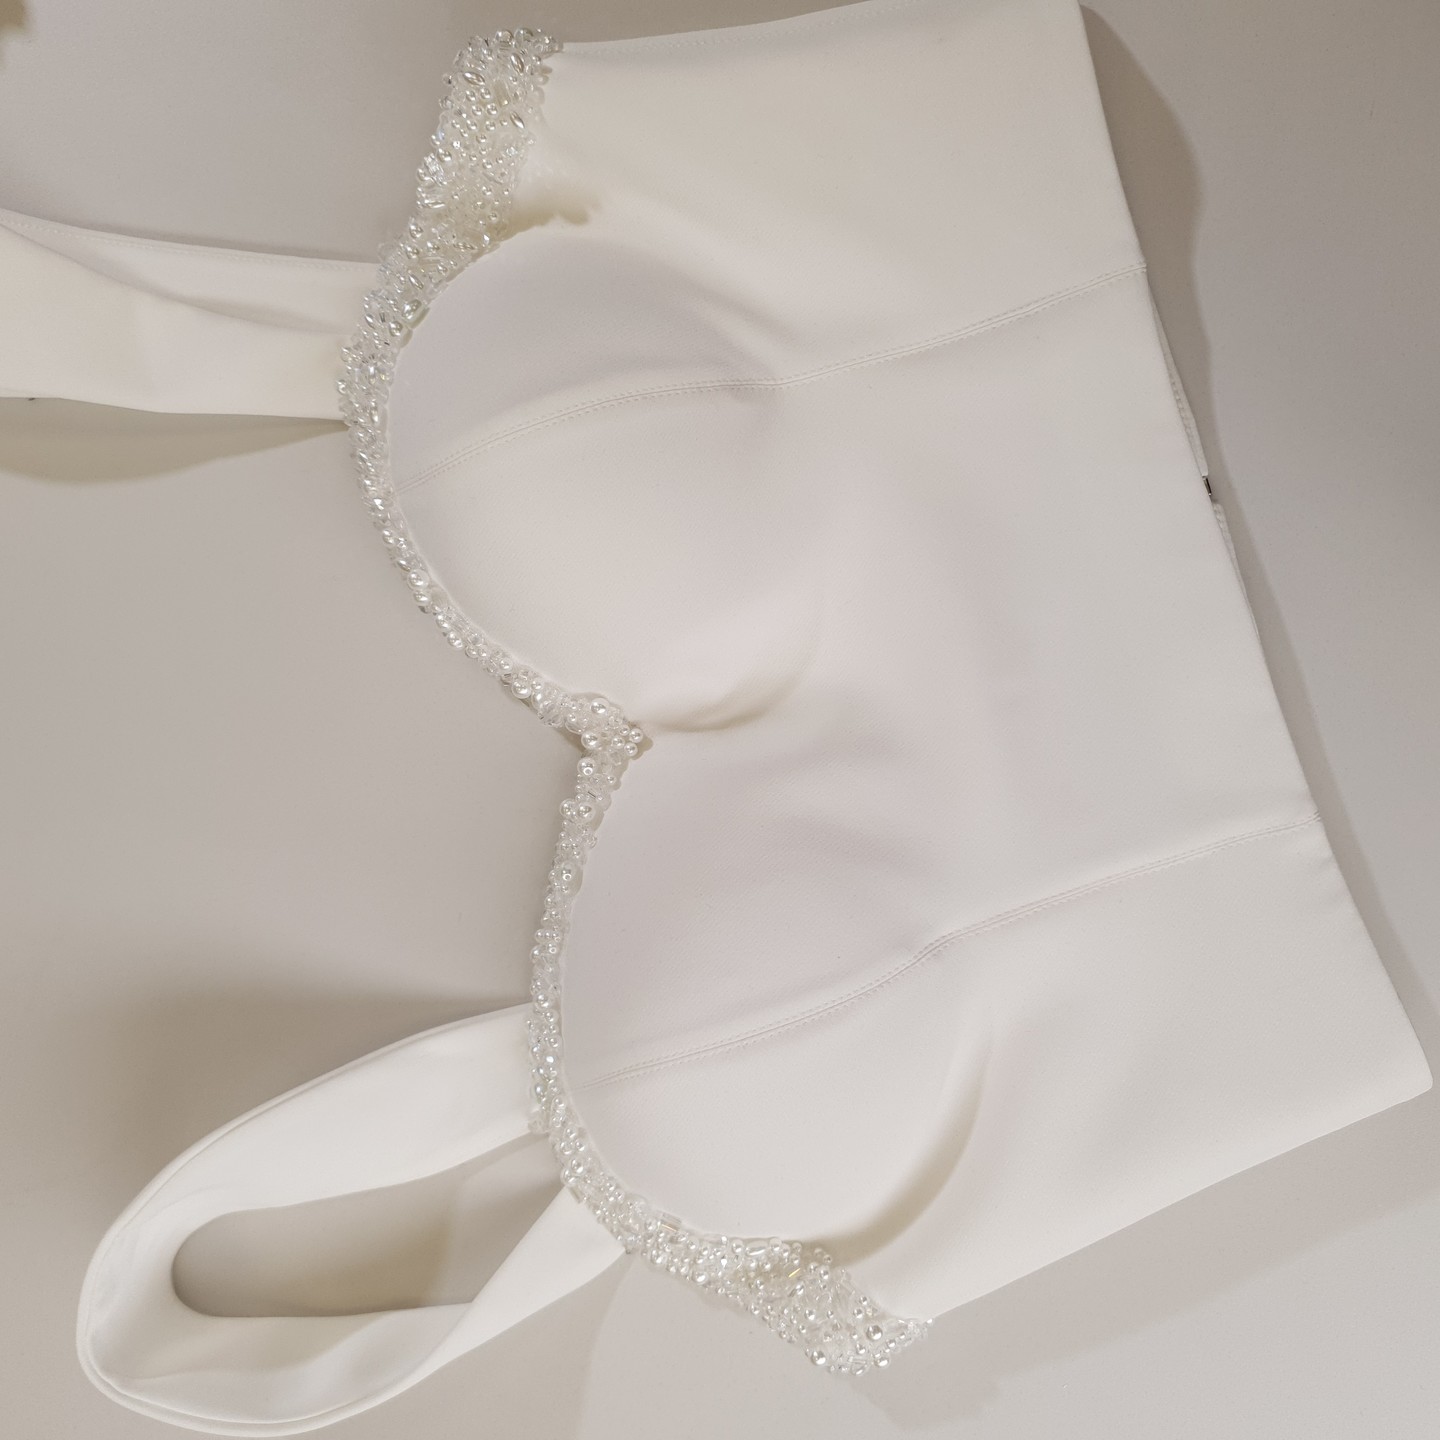 Beaded bustier, 2021, couture, top, bridal, off-white, bridal corset and skirt #6, embroidery